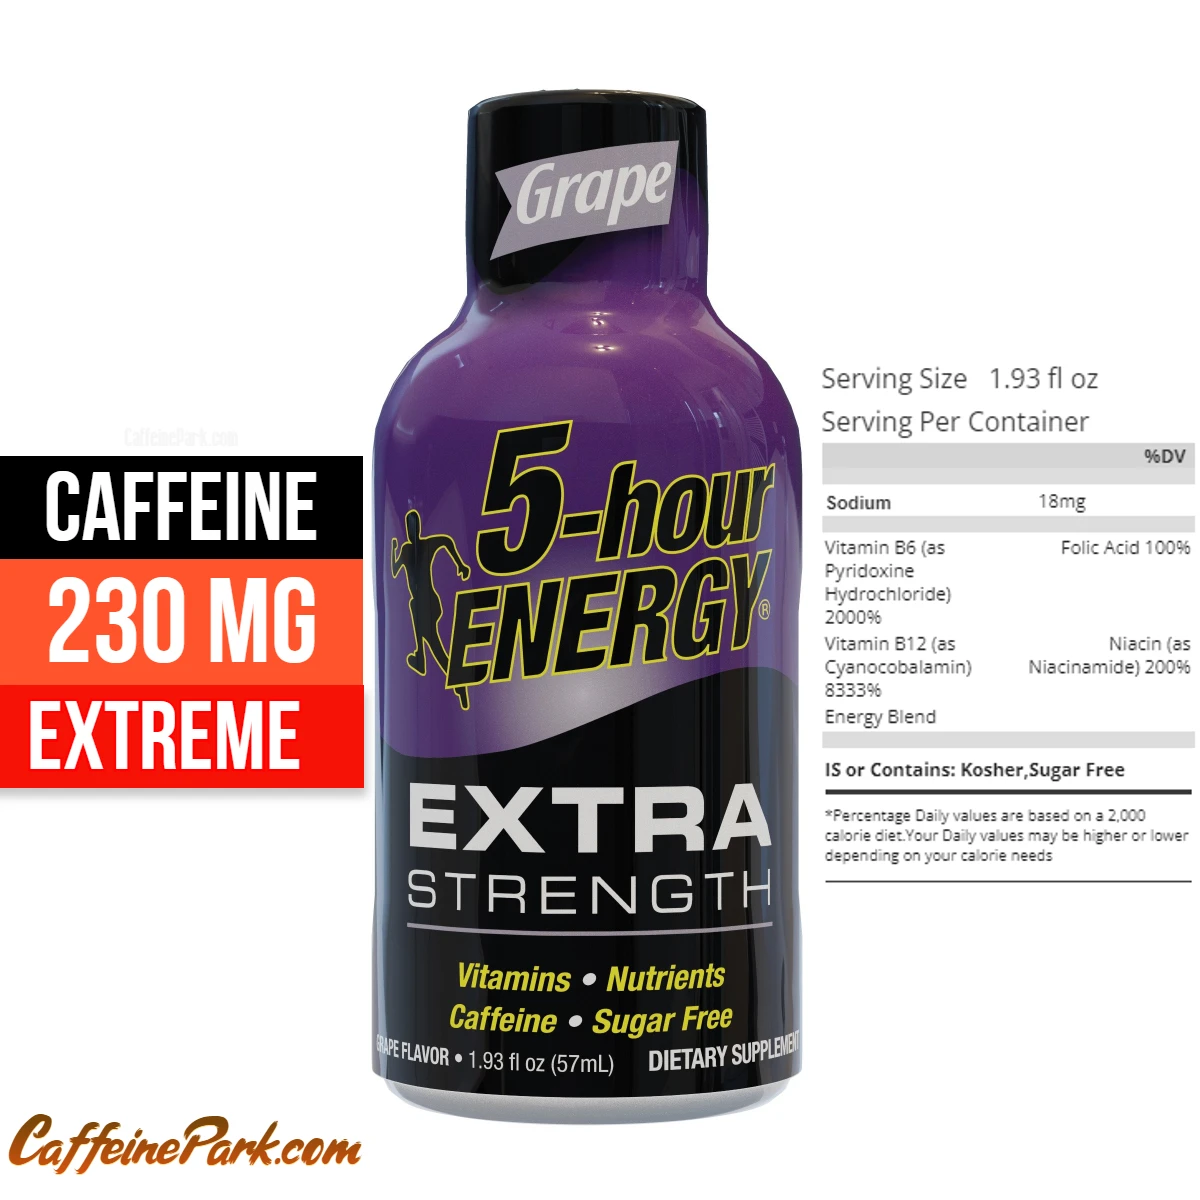 Caffeine is in Hour Energy Extra Strength